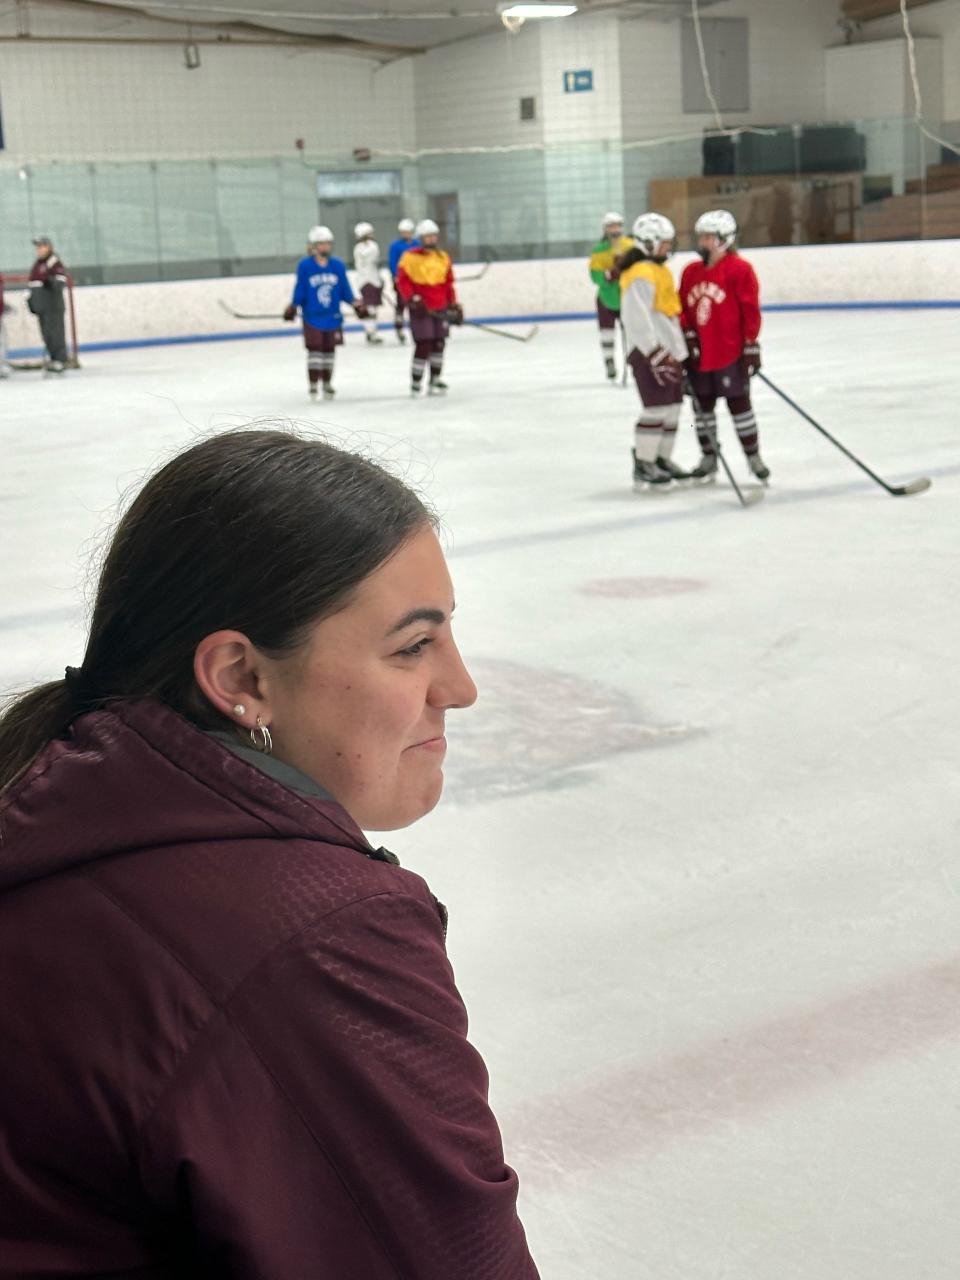 Durfee three-sport athlete and Bishop Stang ice hockey player Emily Curran watches a recent practice at Hetland Ice Arena.